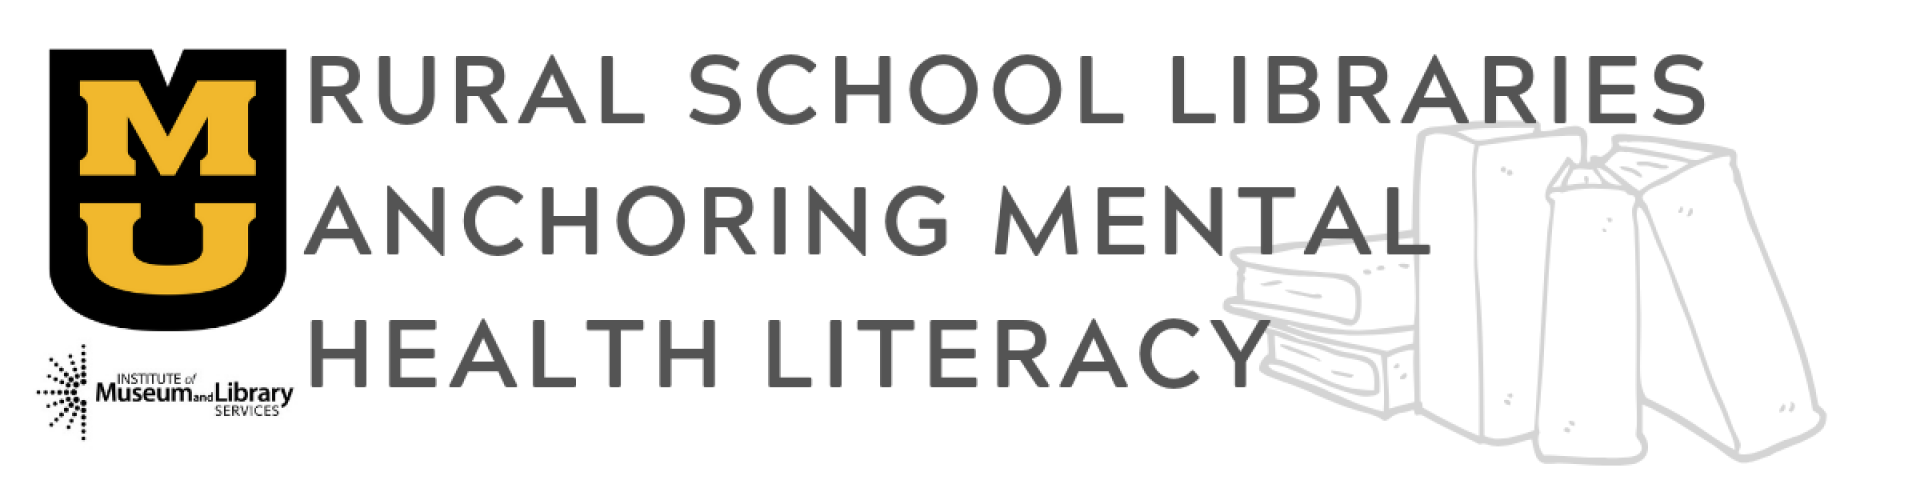 School Libraries Supporting Community Mental Health